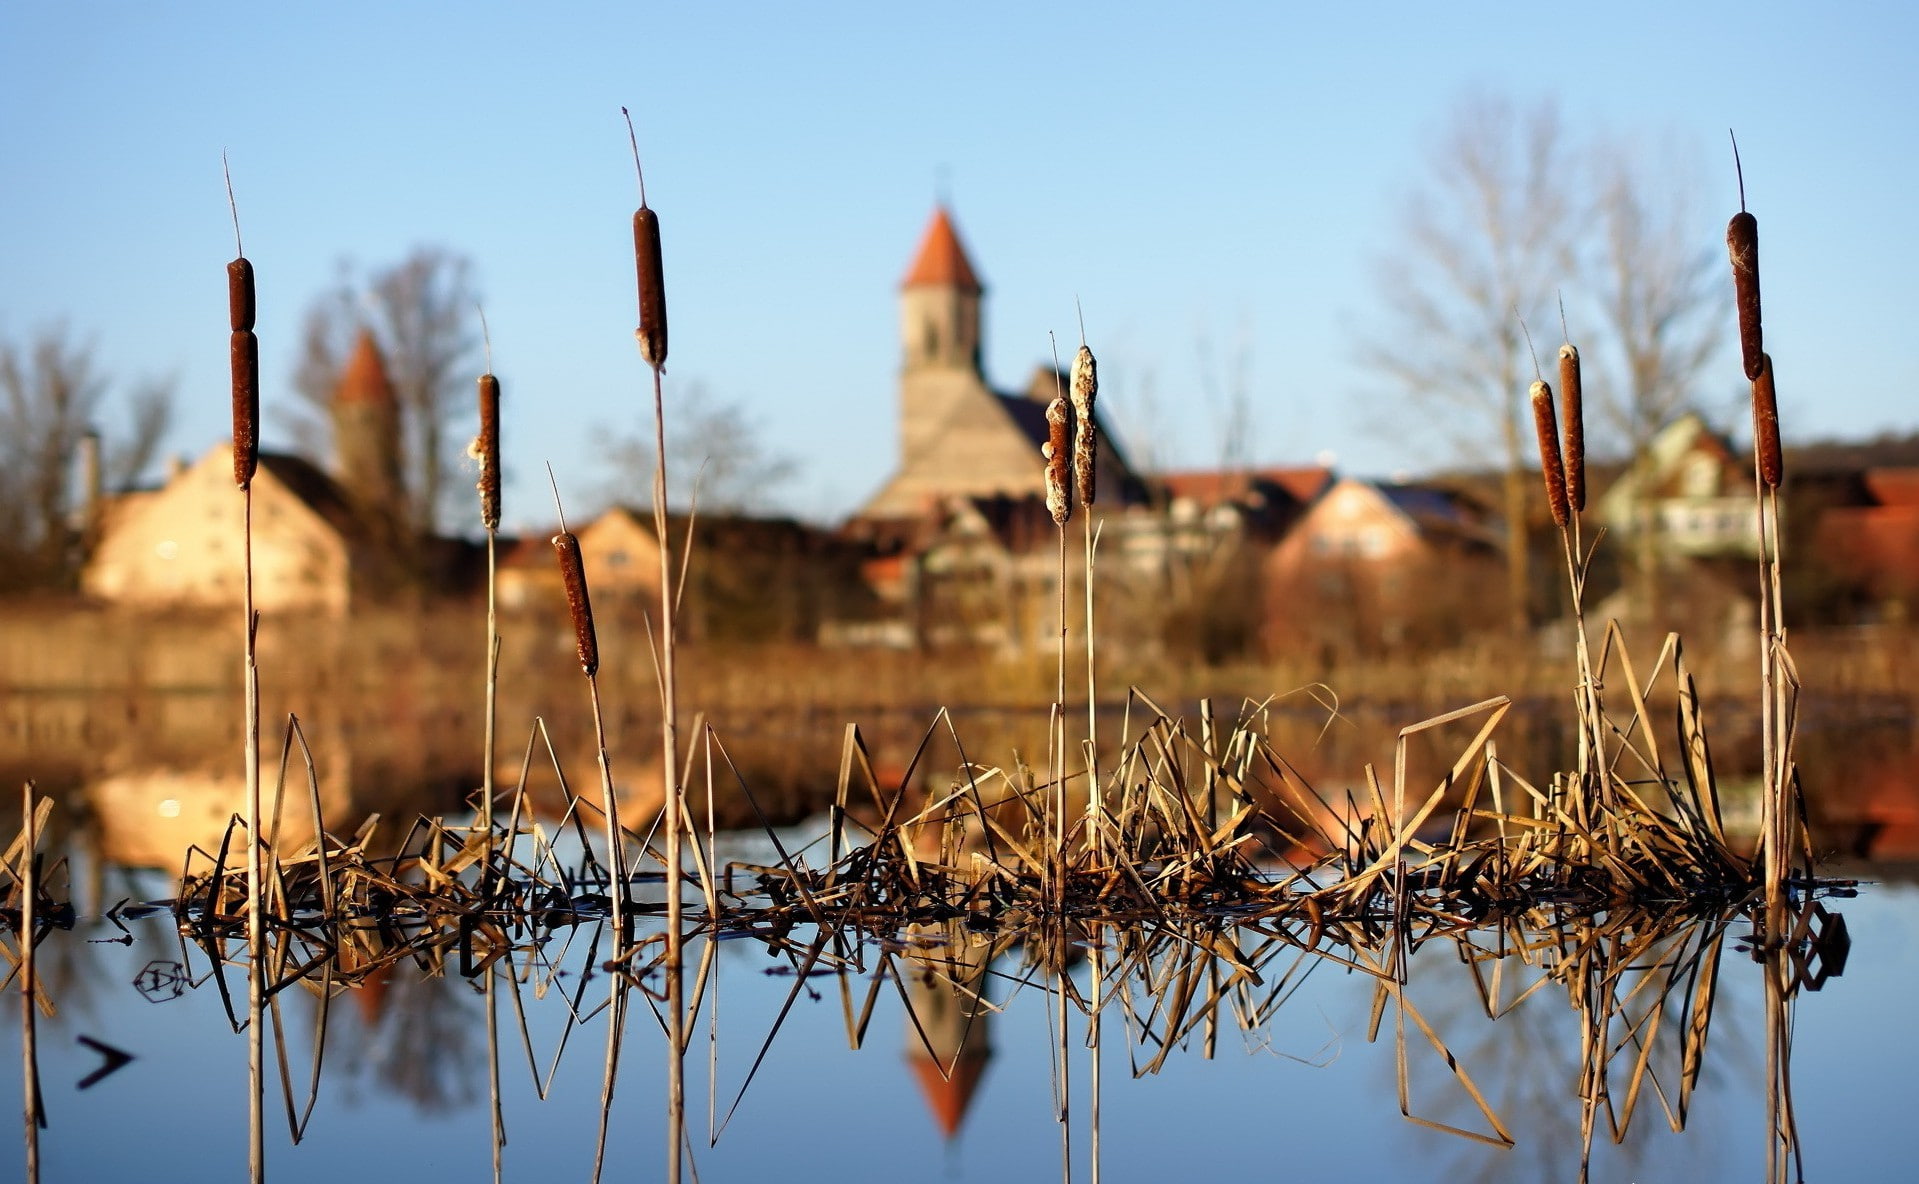 house, landscape, nature, reflection, Spikelets, water, plant